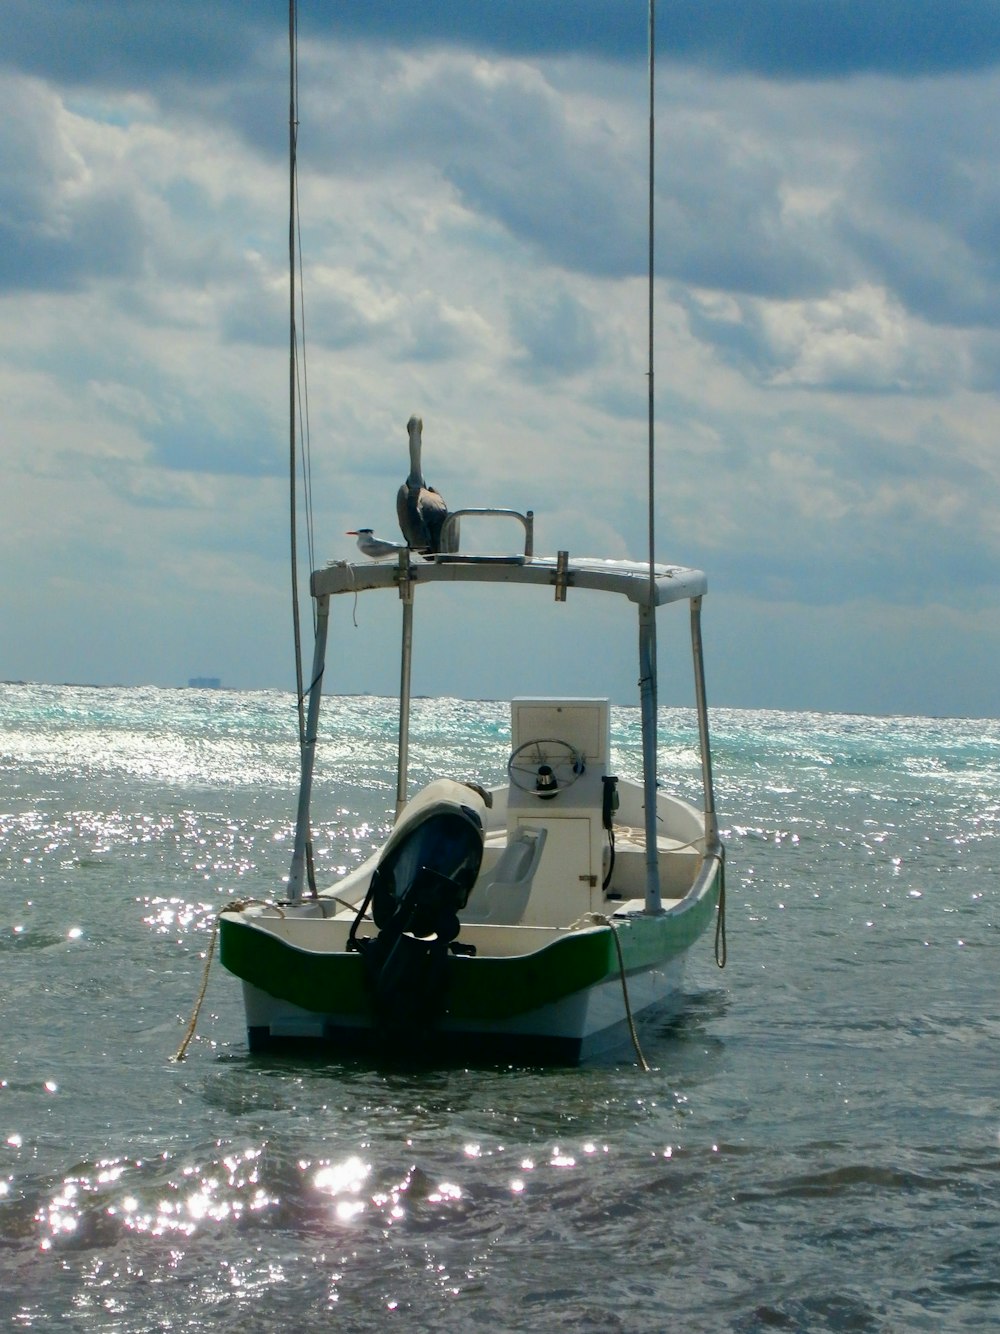 man in black shirt riding on blue and white boat on sea during daytime